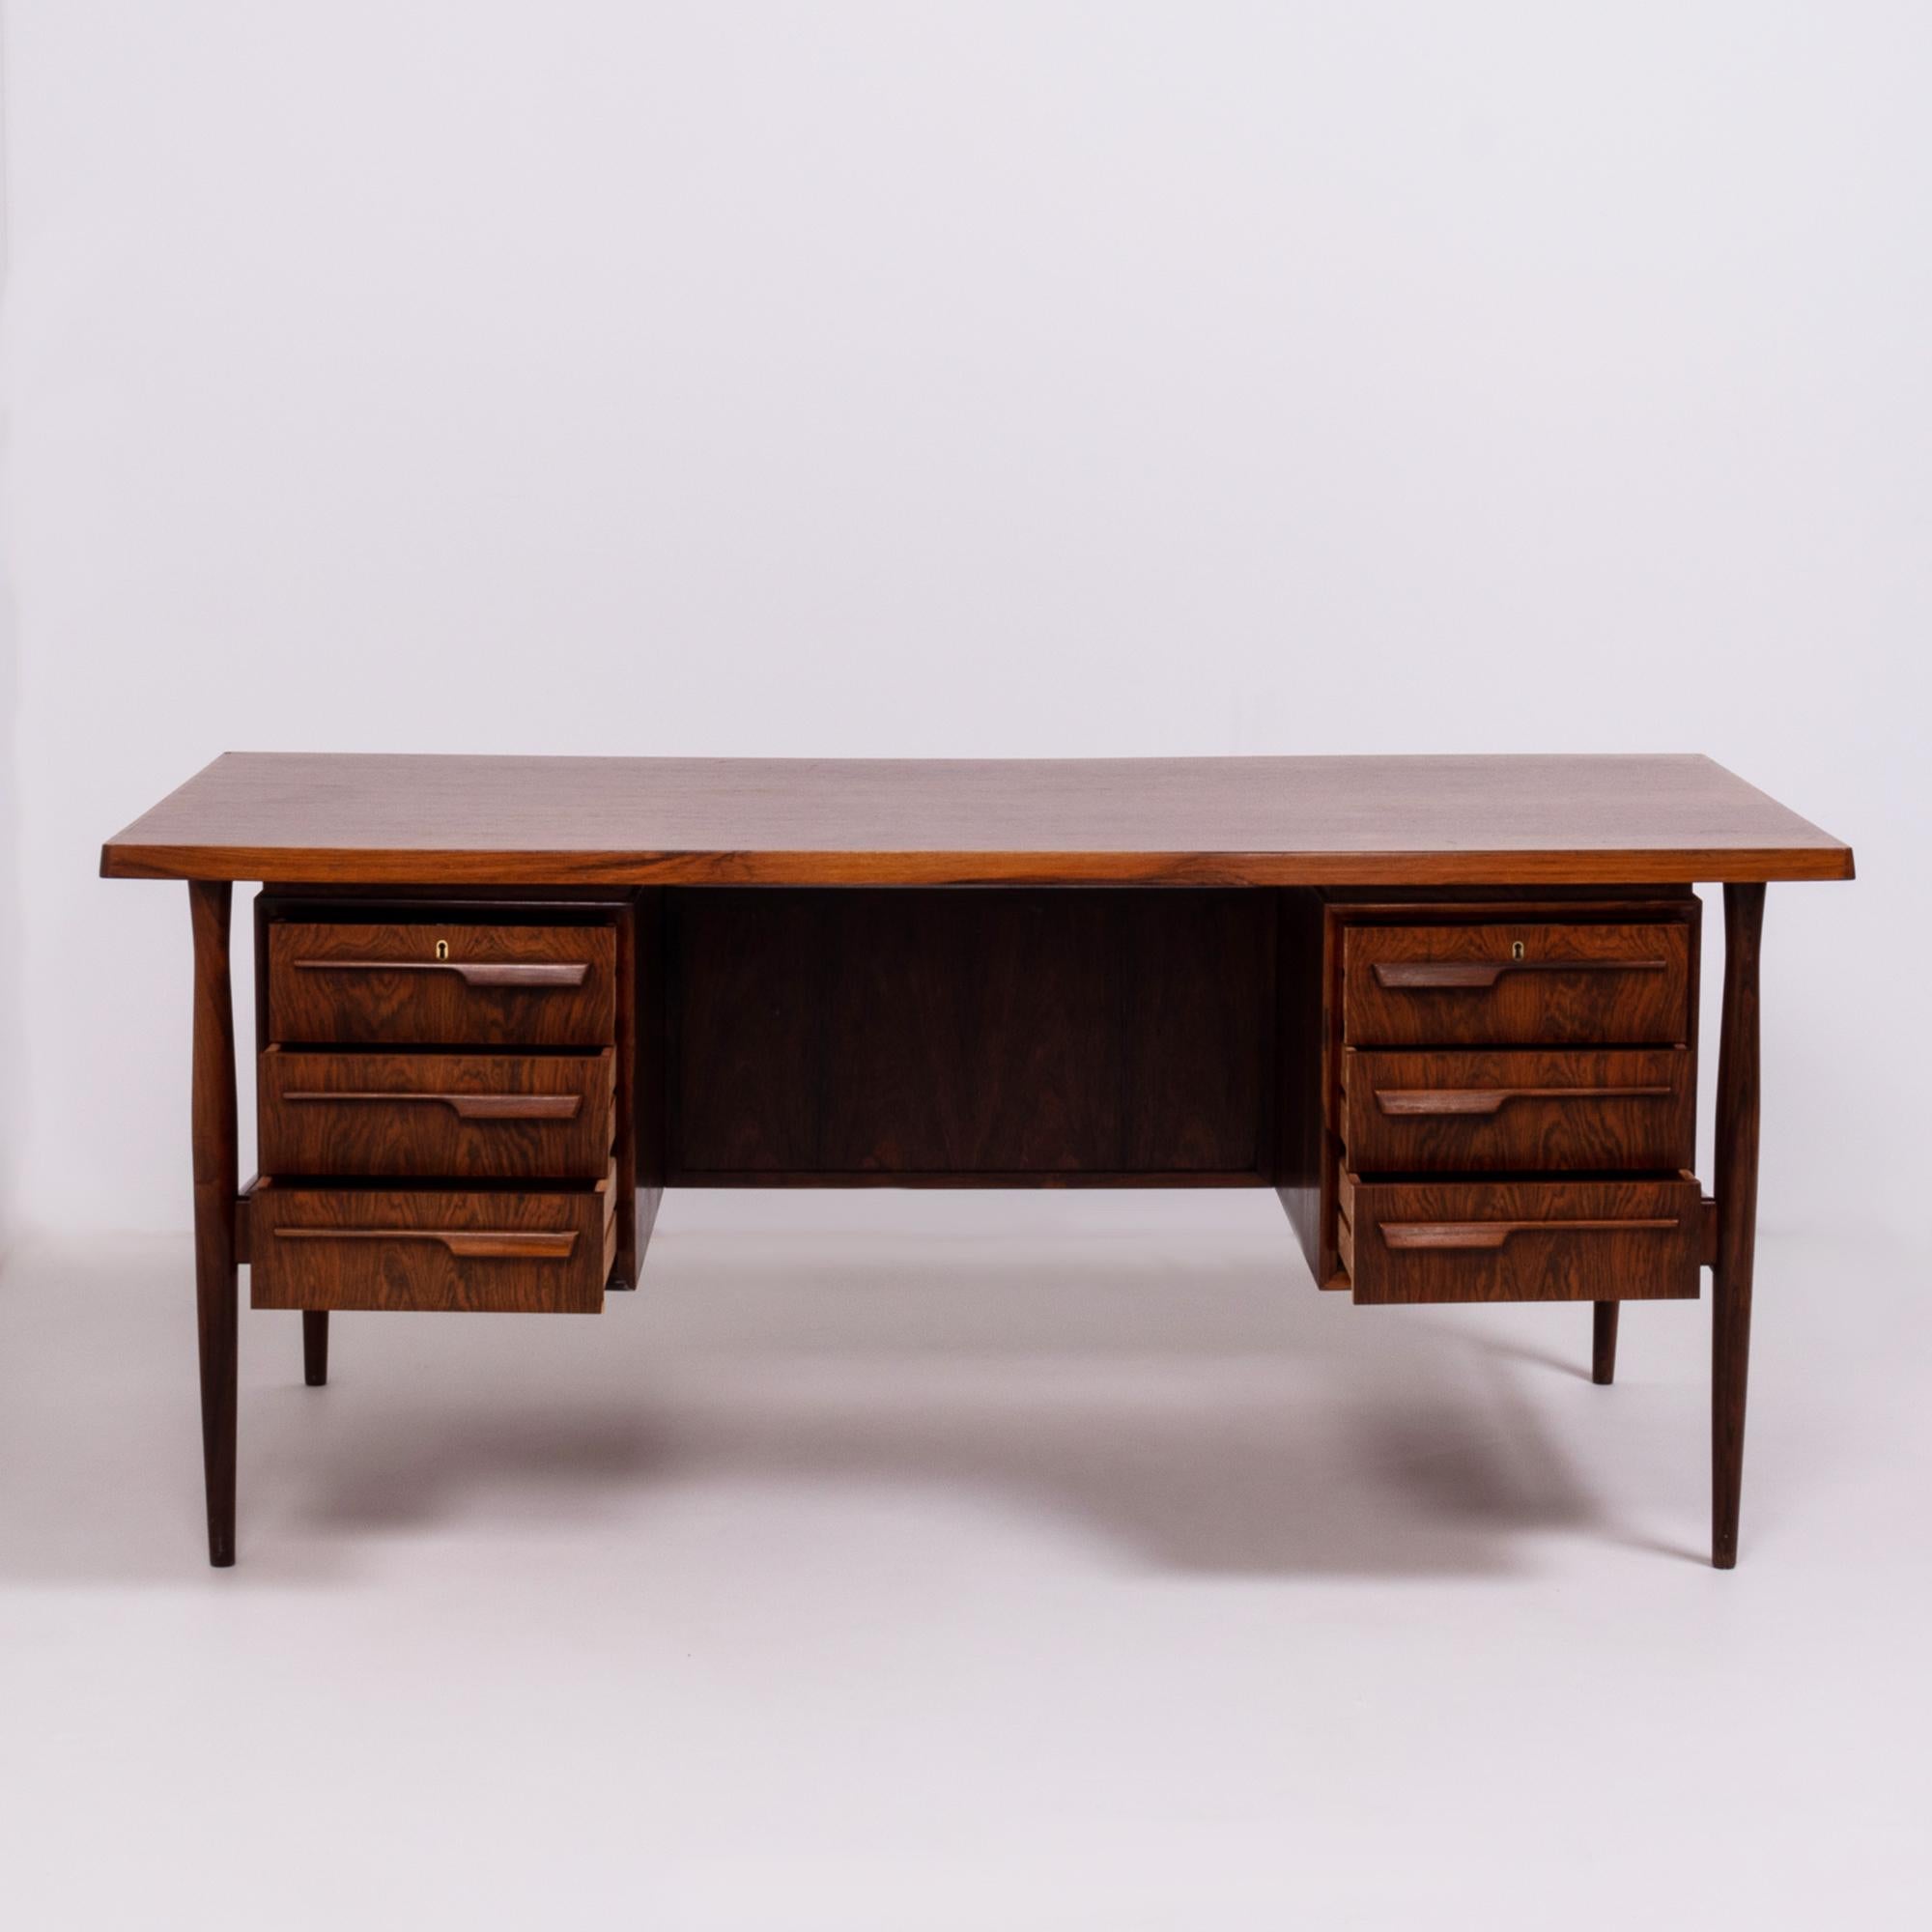 Beautifully constructed in rosewood, this large solid desk is a wonderful example of Mid-Century Modern design

Offering plenty of storage options, the front of the desk has two sets of three drawers, while the back of the desk has an open shelf